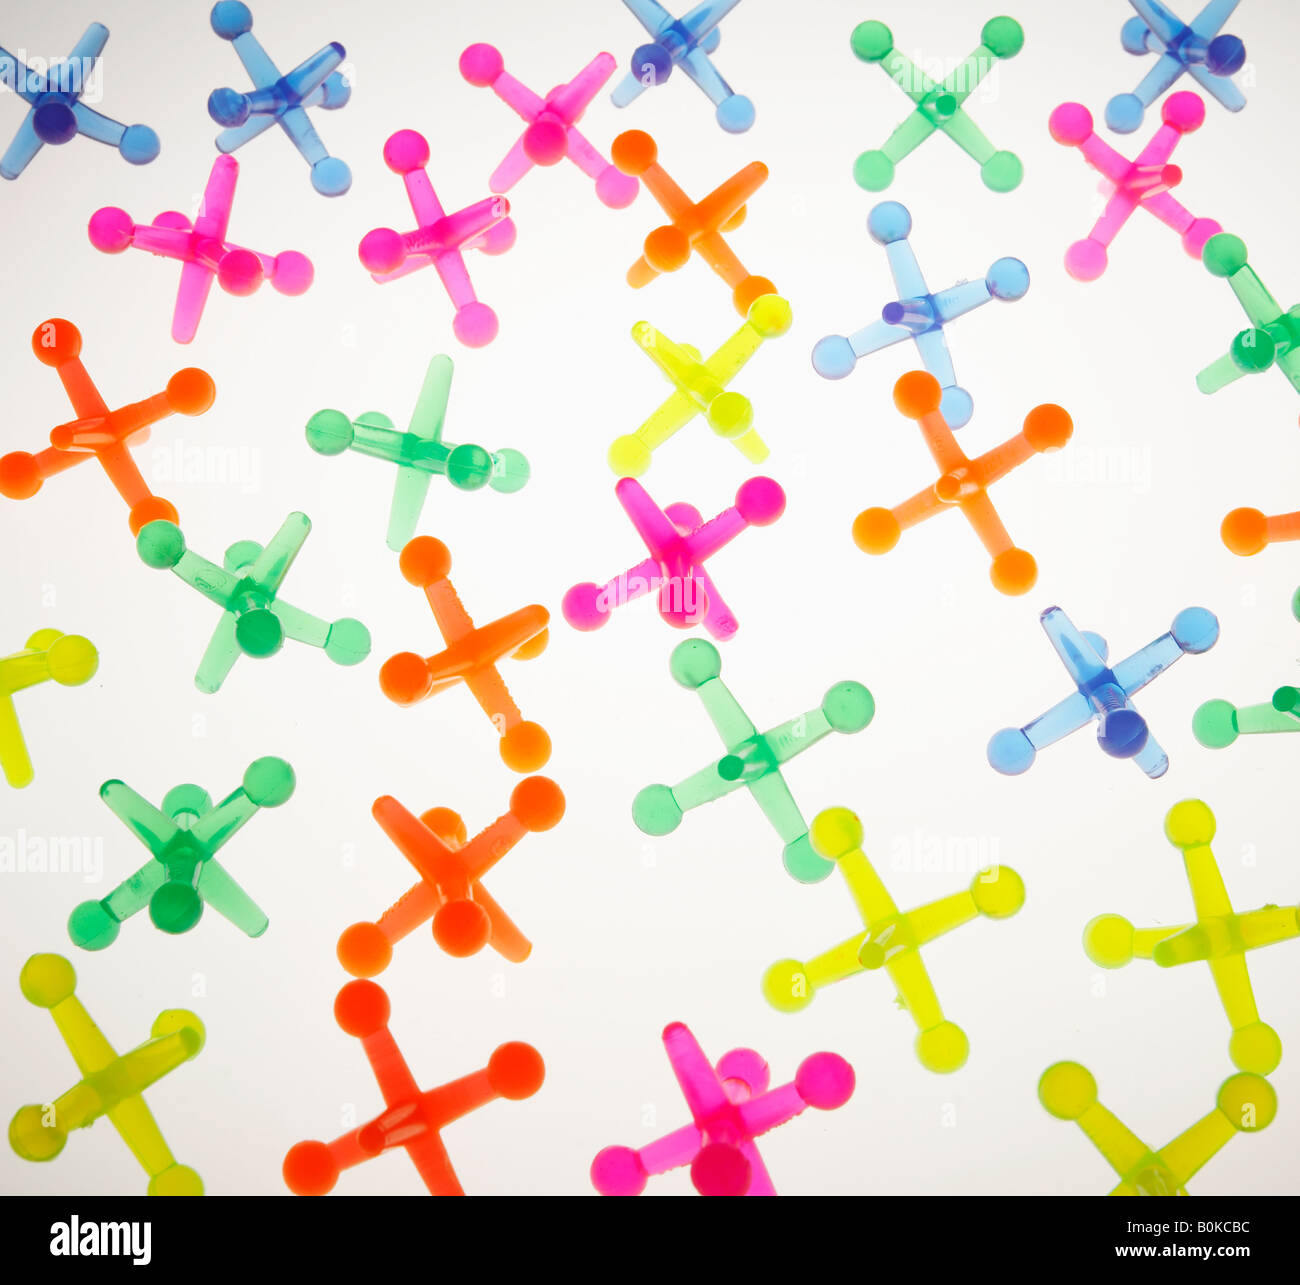 Colorful Cross Shaped Plastic Objects Stock Photo